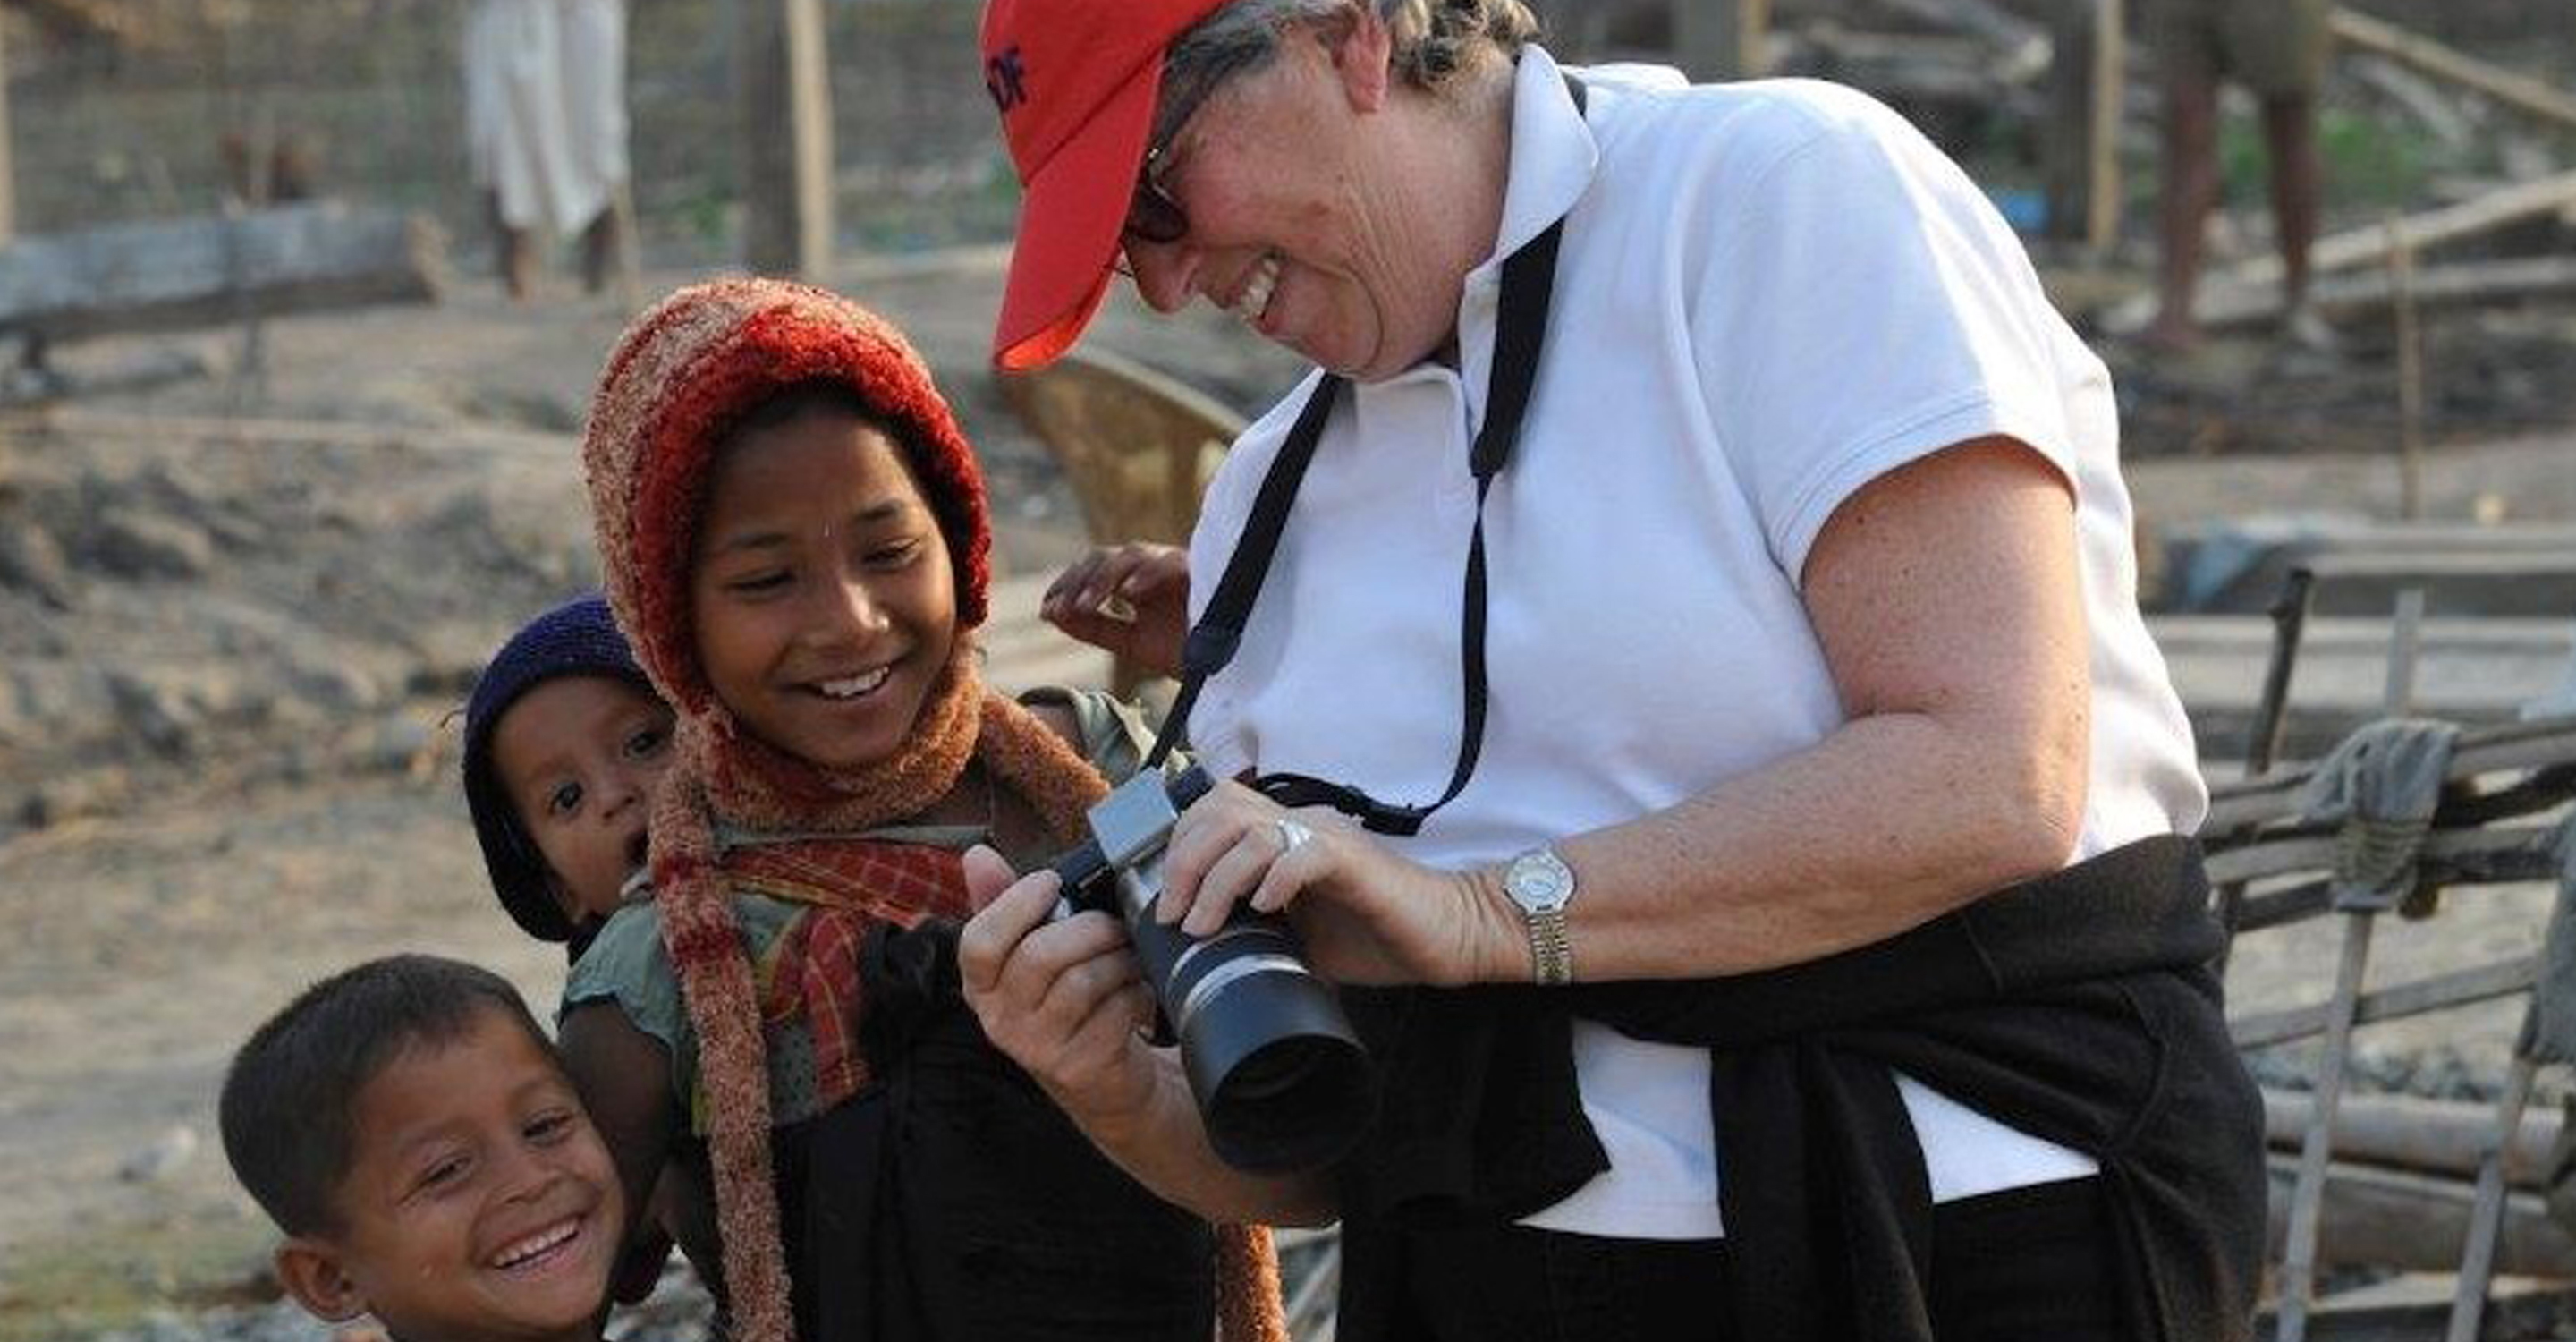 A traveler shows local children a photo she took on her camera while visiting India